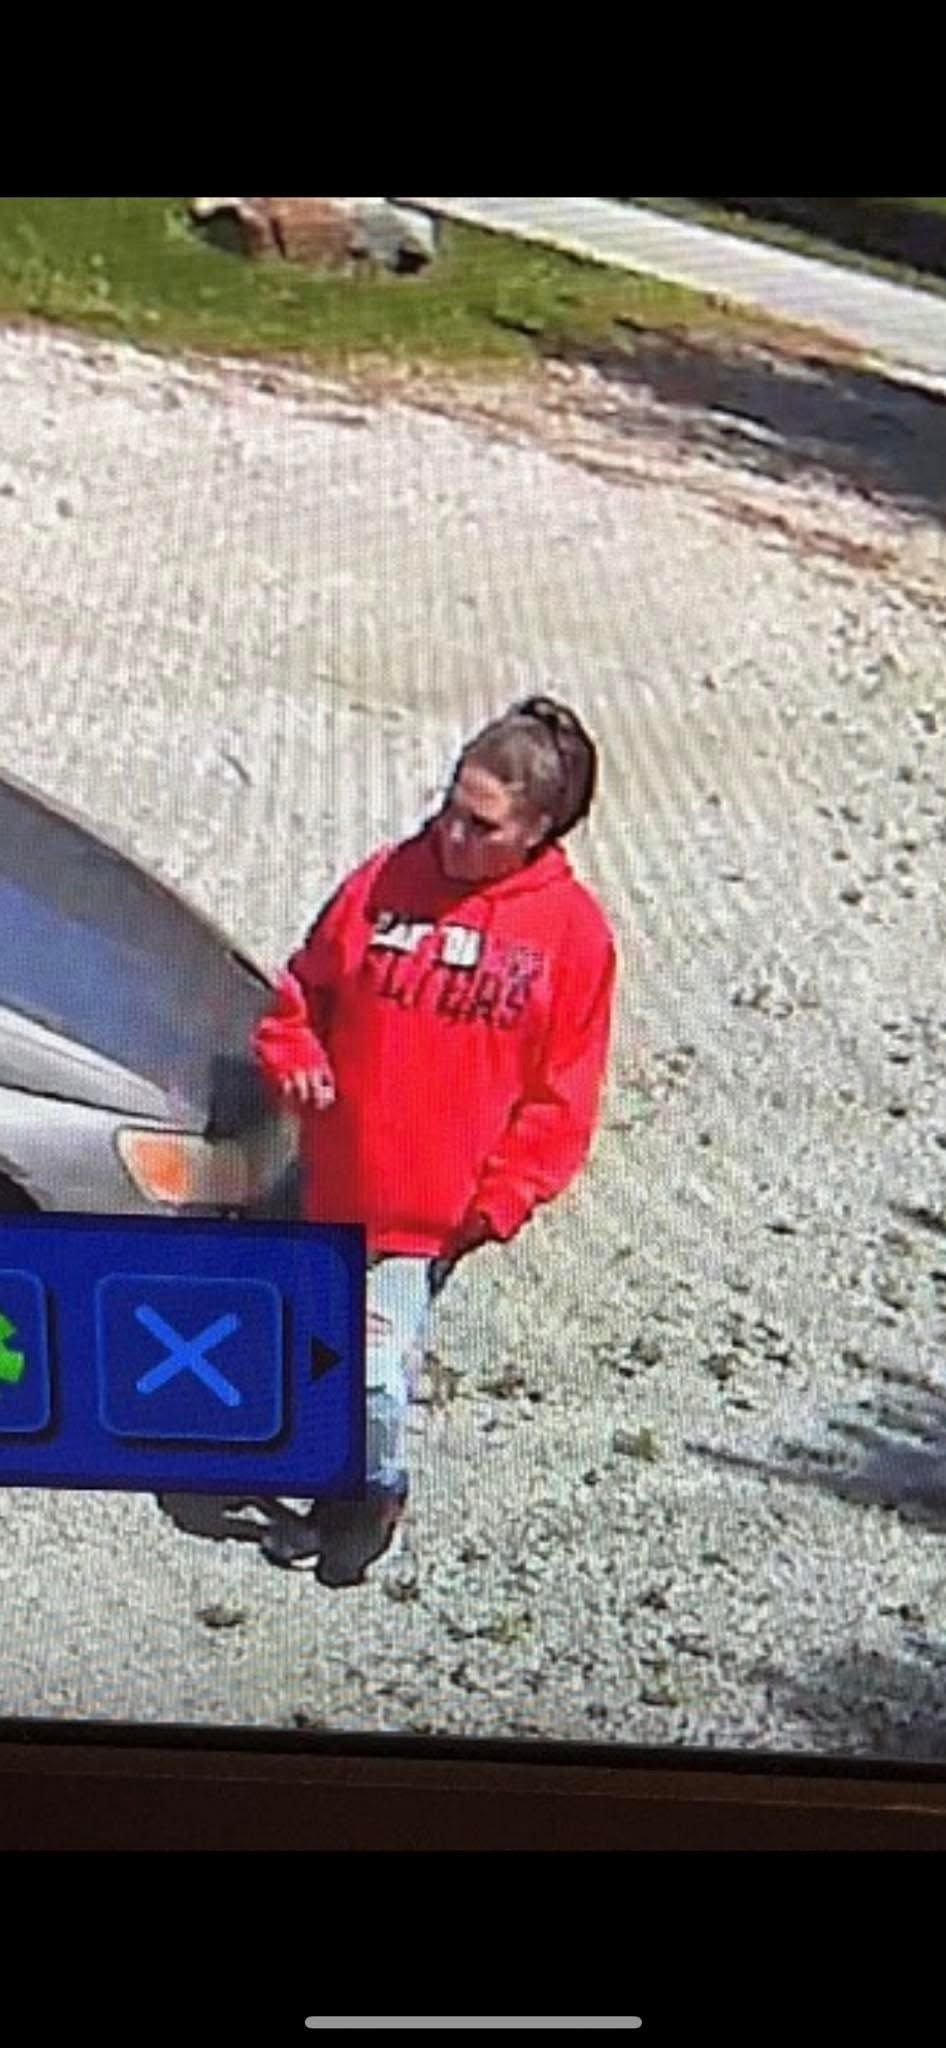 The Preble County Sheriff's Office requests assistance identifying this burglary suspect.